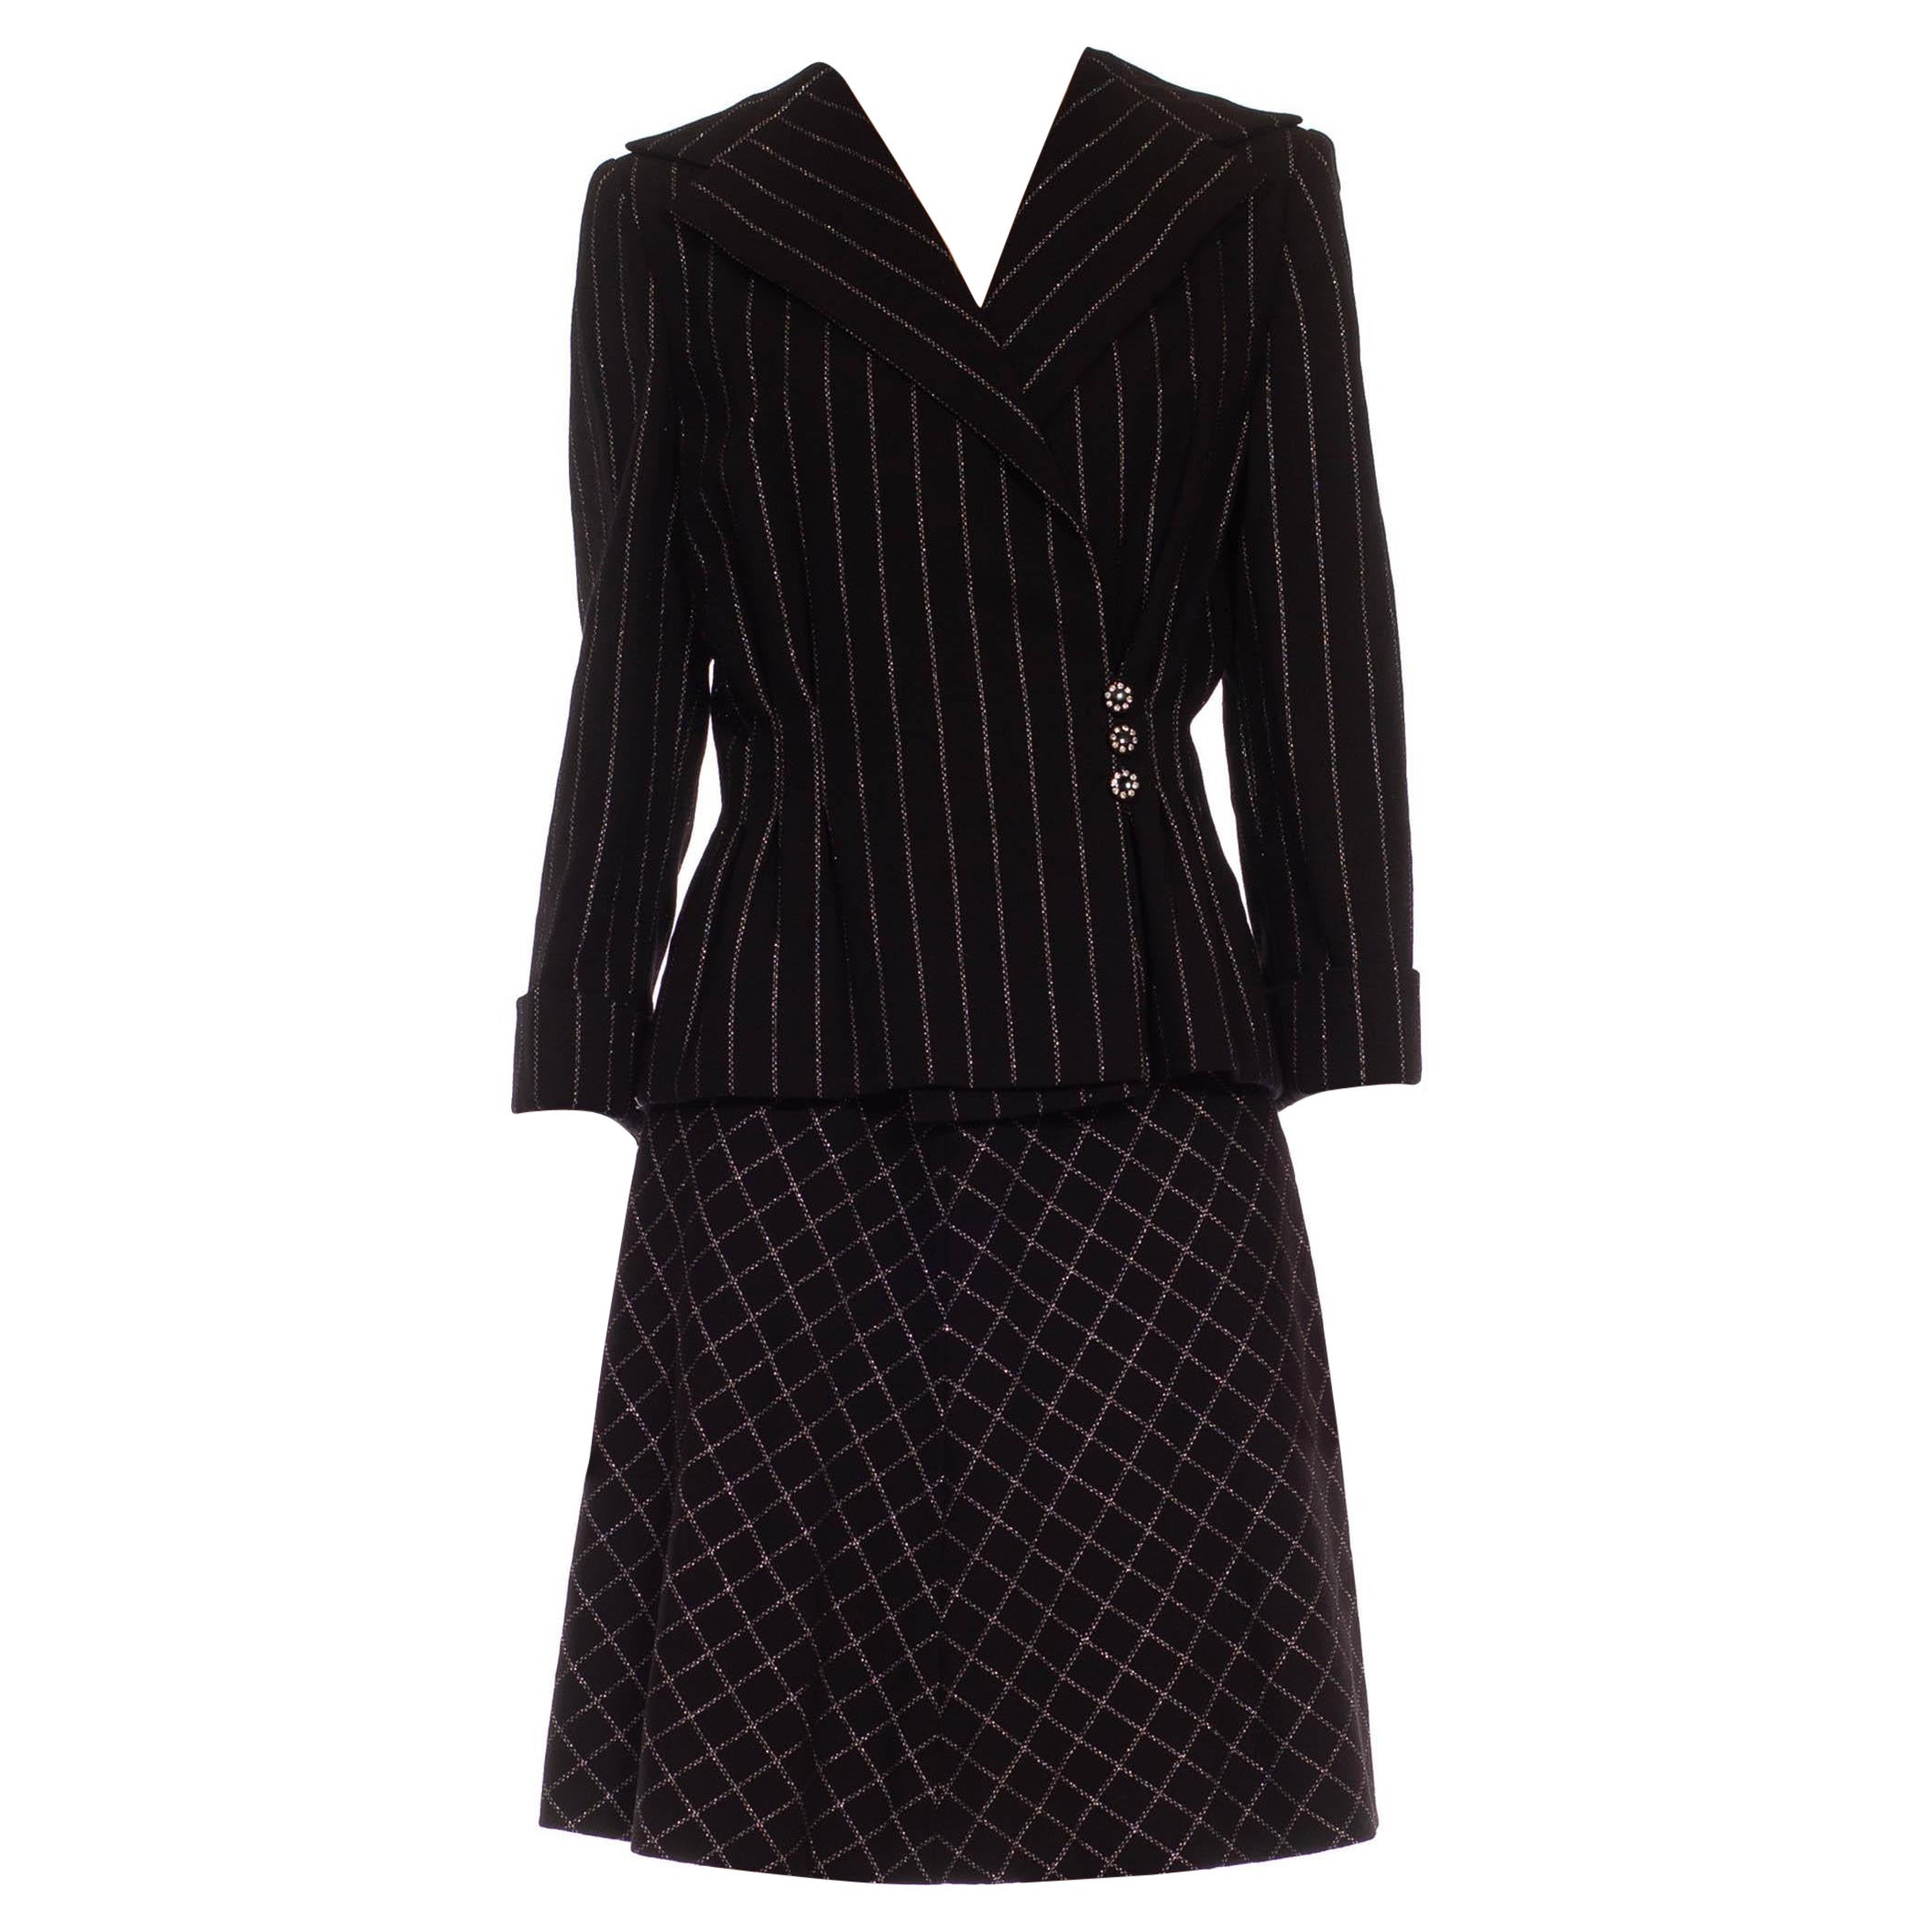 1970S PAULINE TRIGERE Black Silver Lamé Bias Skirt Suit With Silk Lining For Sale